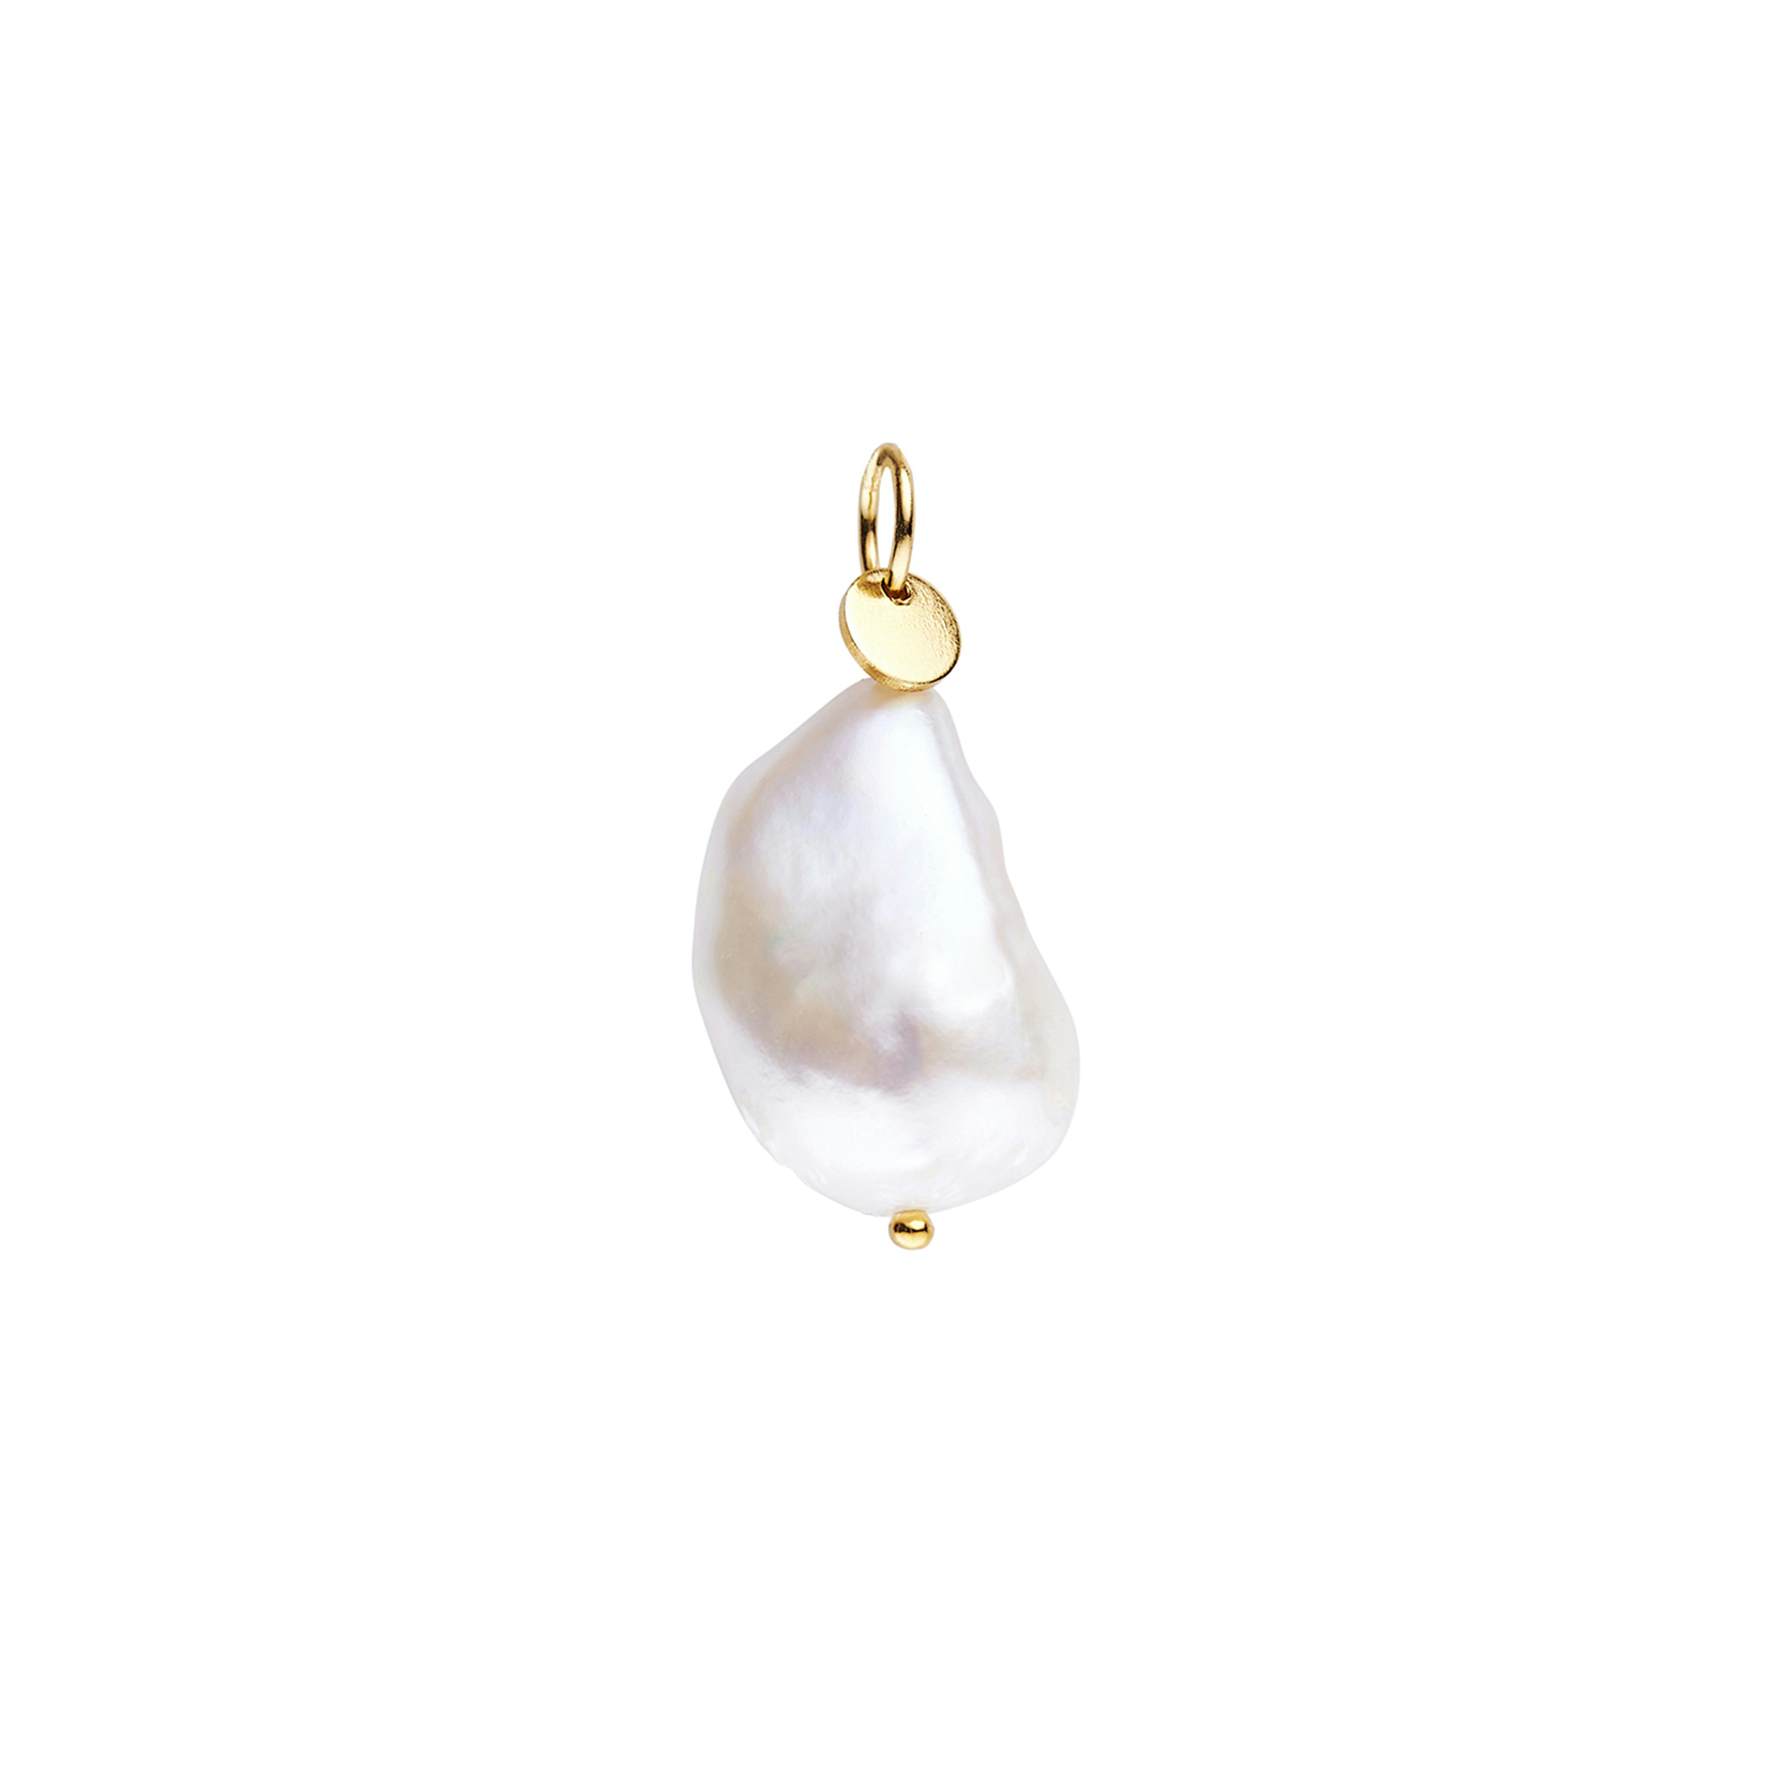 Baroque Pearl Pendant from STINE A Jewelry in Goldplated-Silver Sterling 925